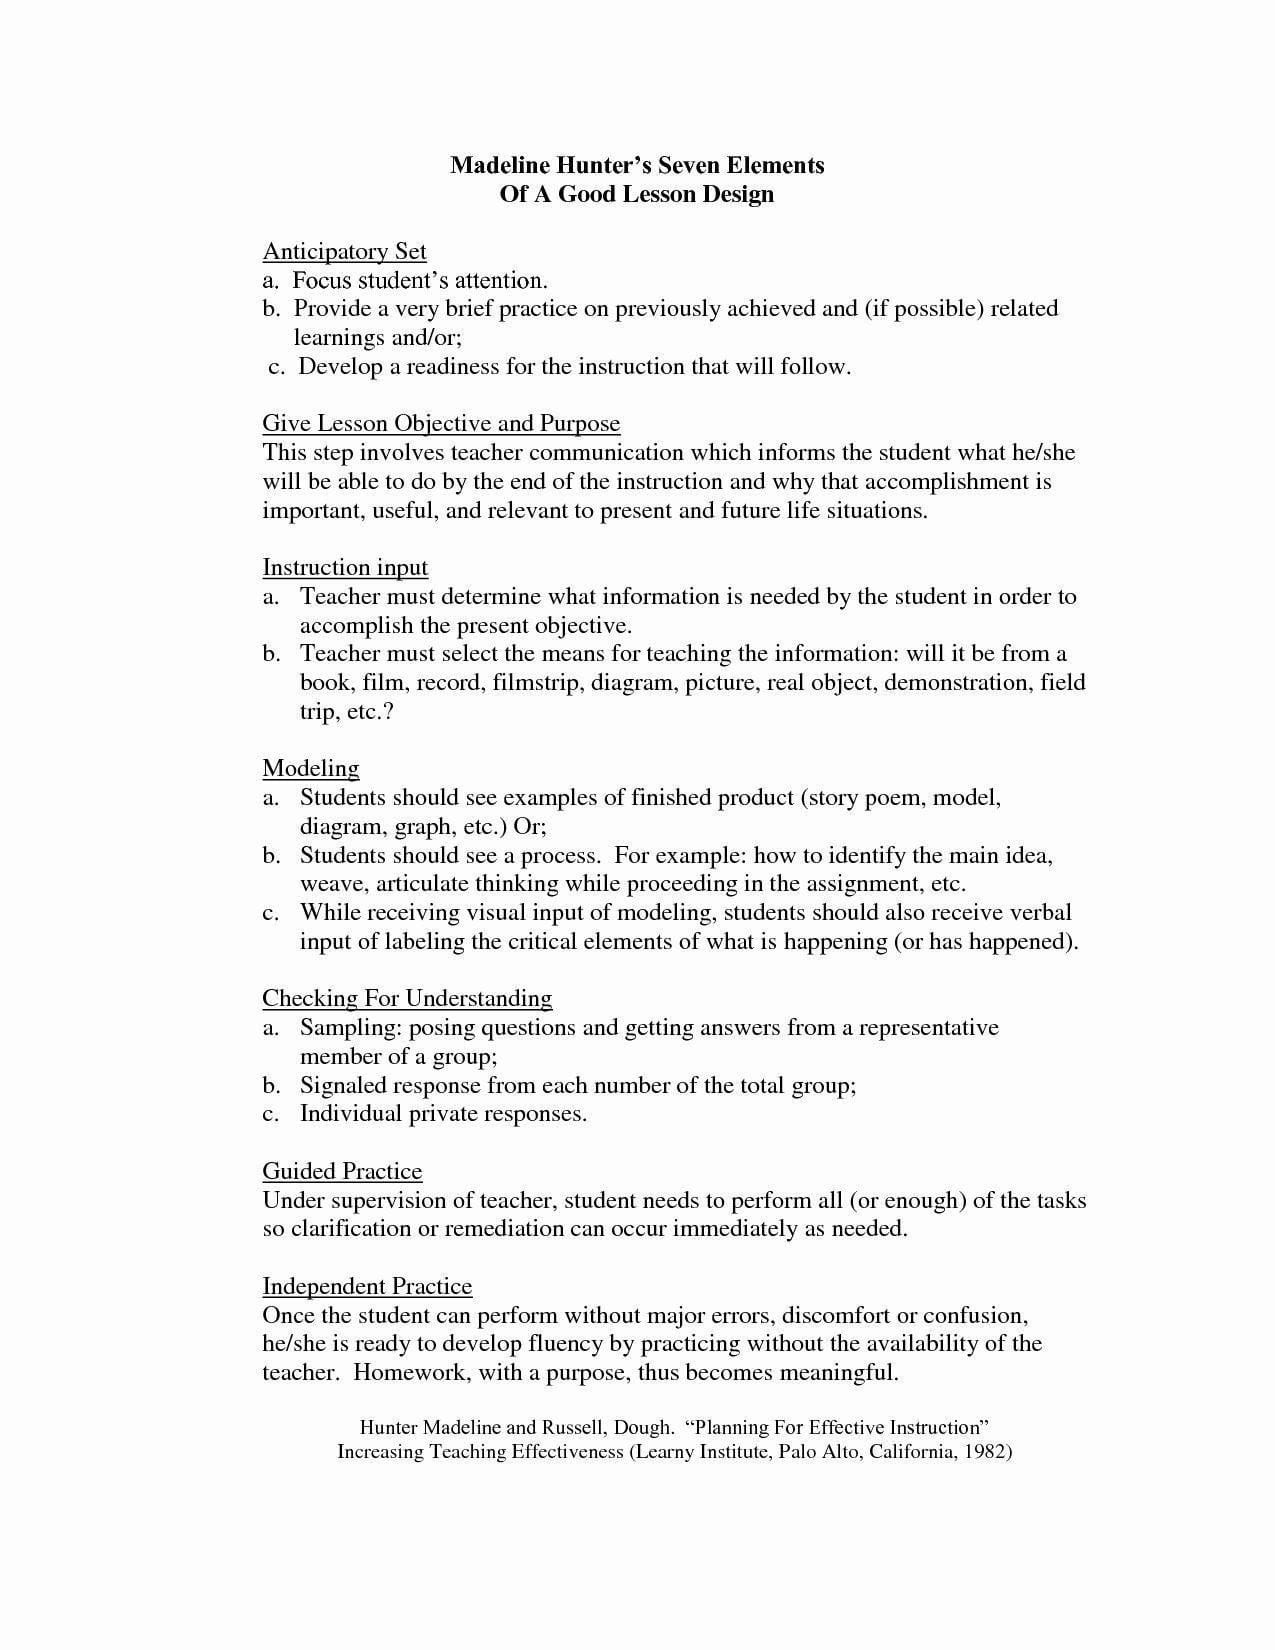 Hunting the Elements Worksheet Answers Element Hunters Worksheet